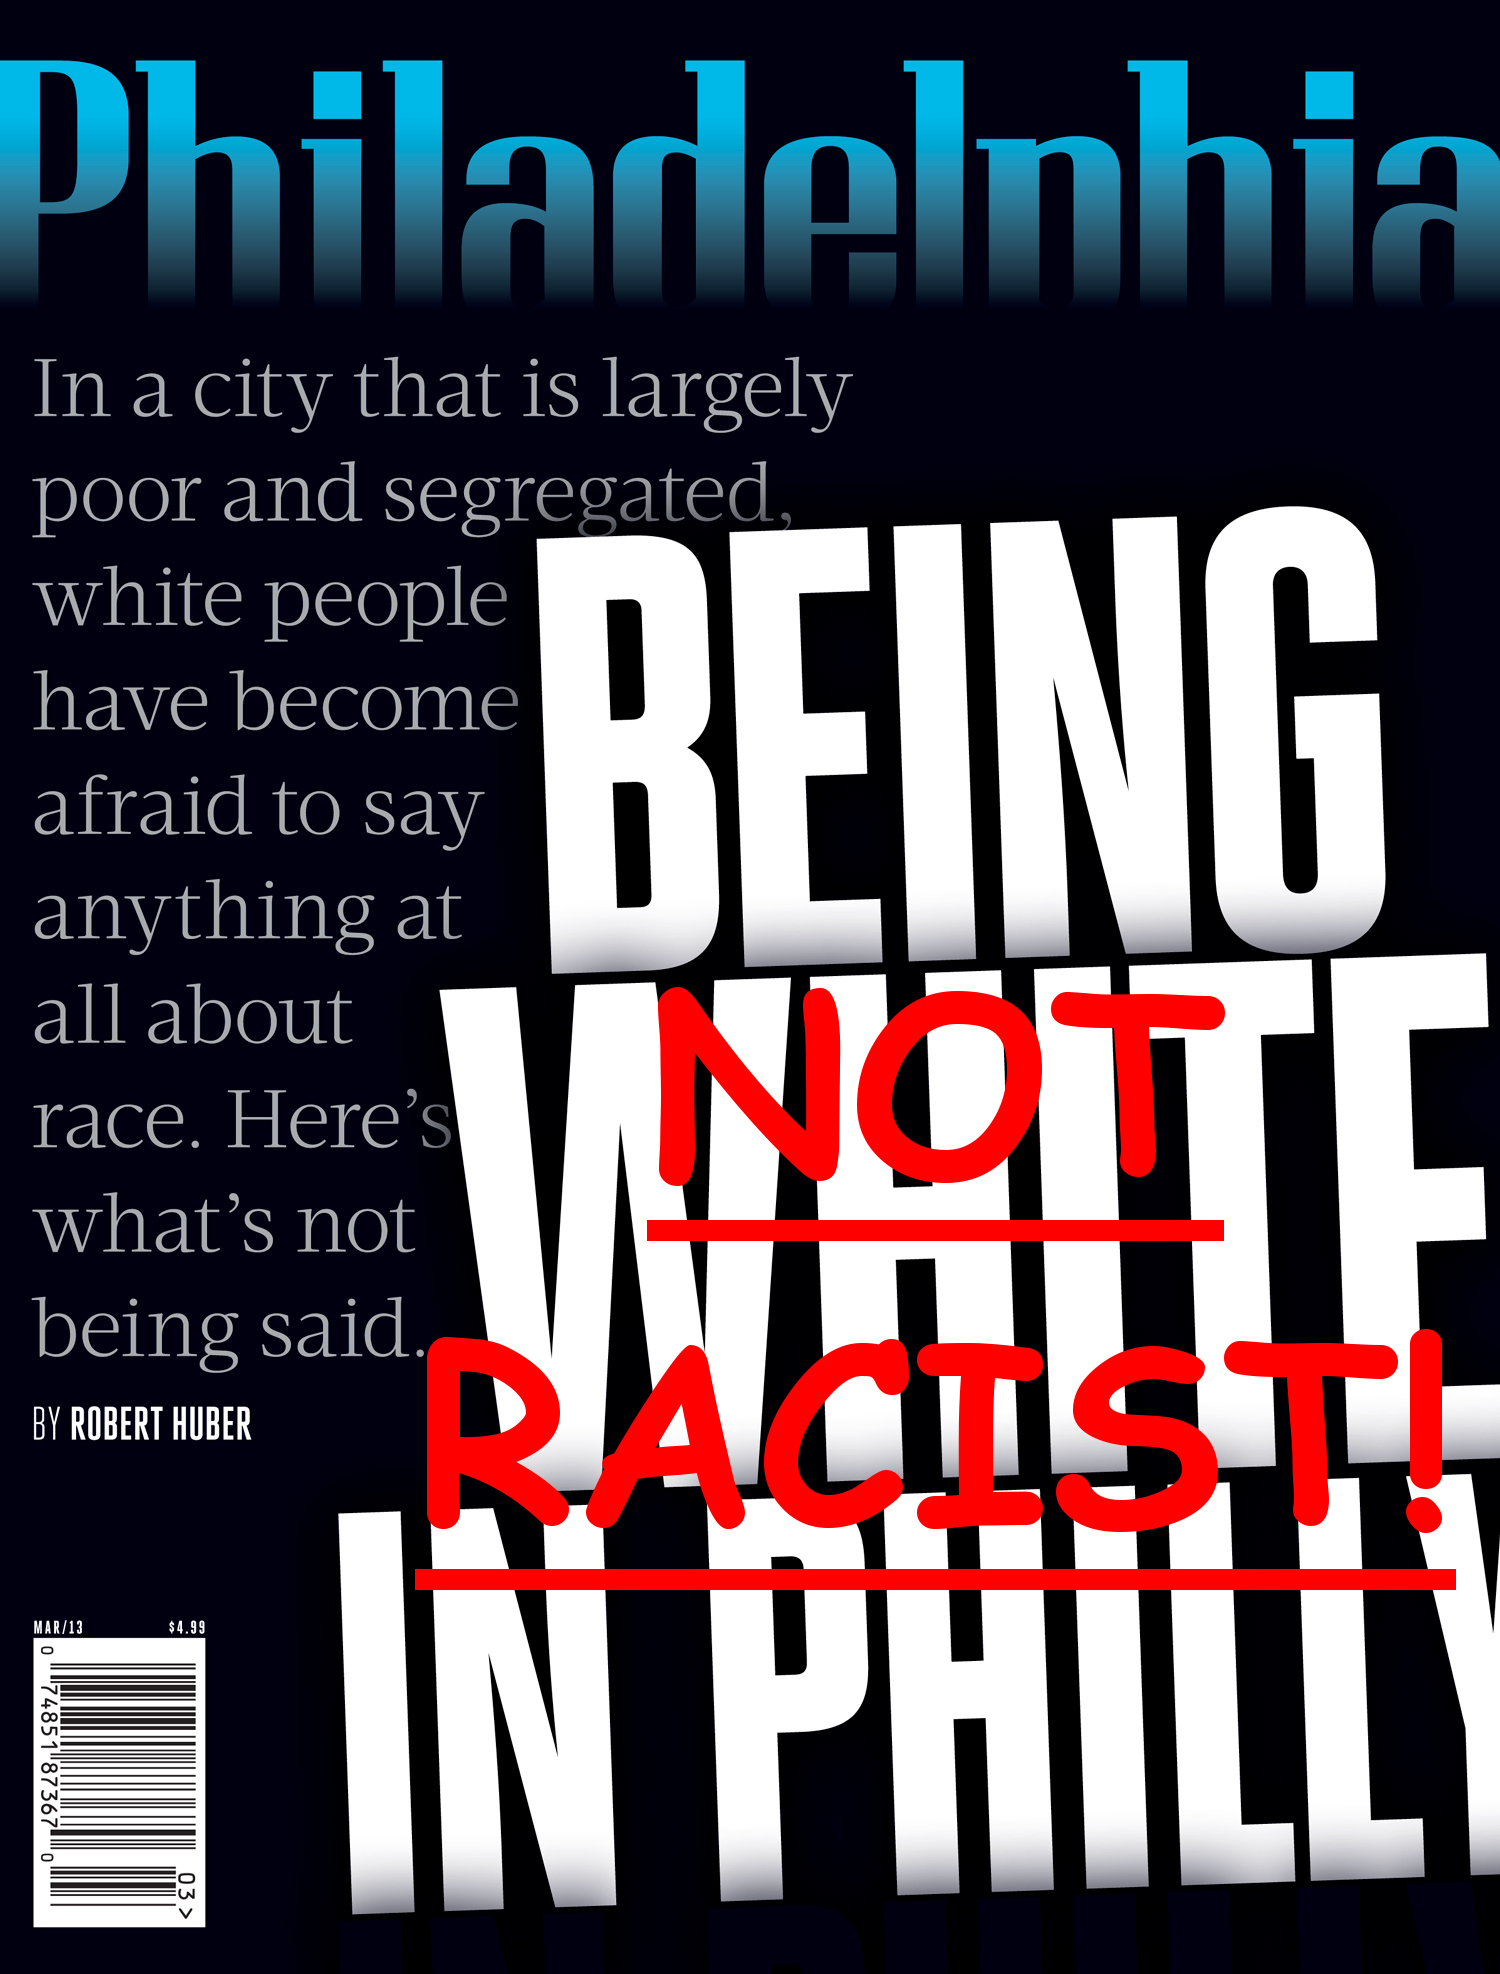 In a city that is largely poor and segregated white people have be e afraid to